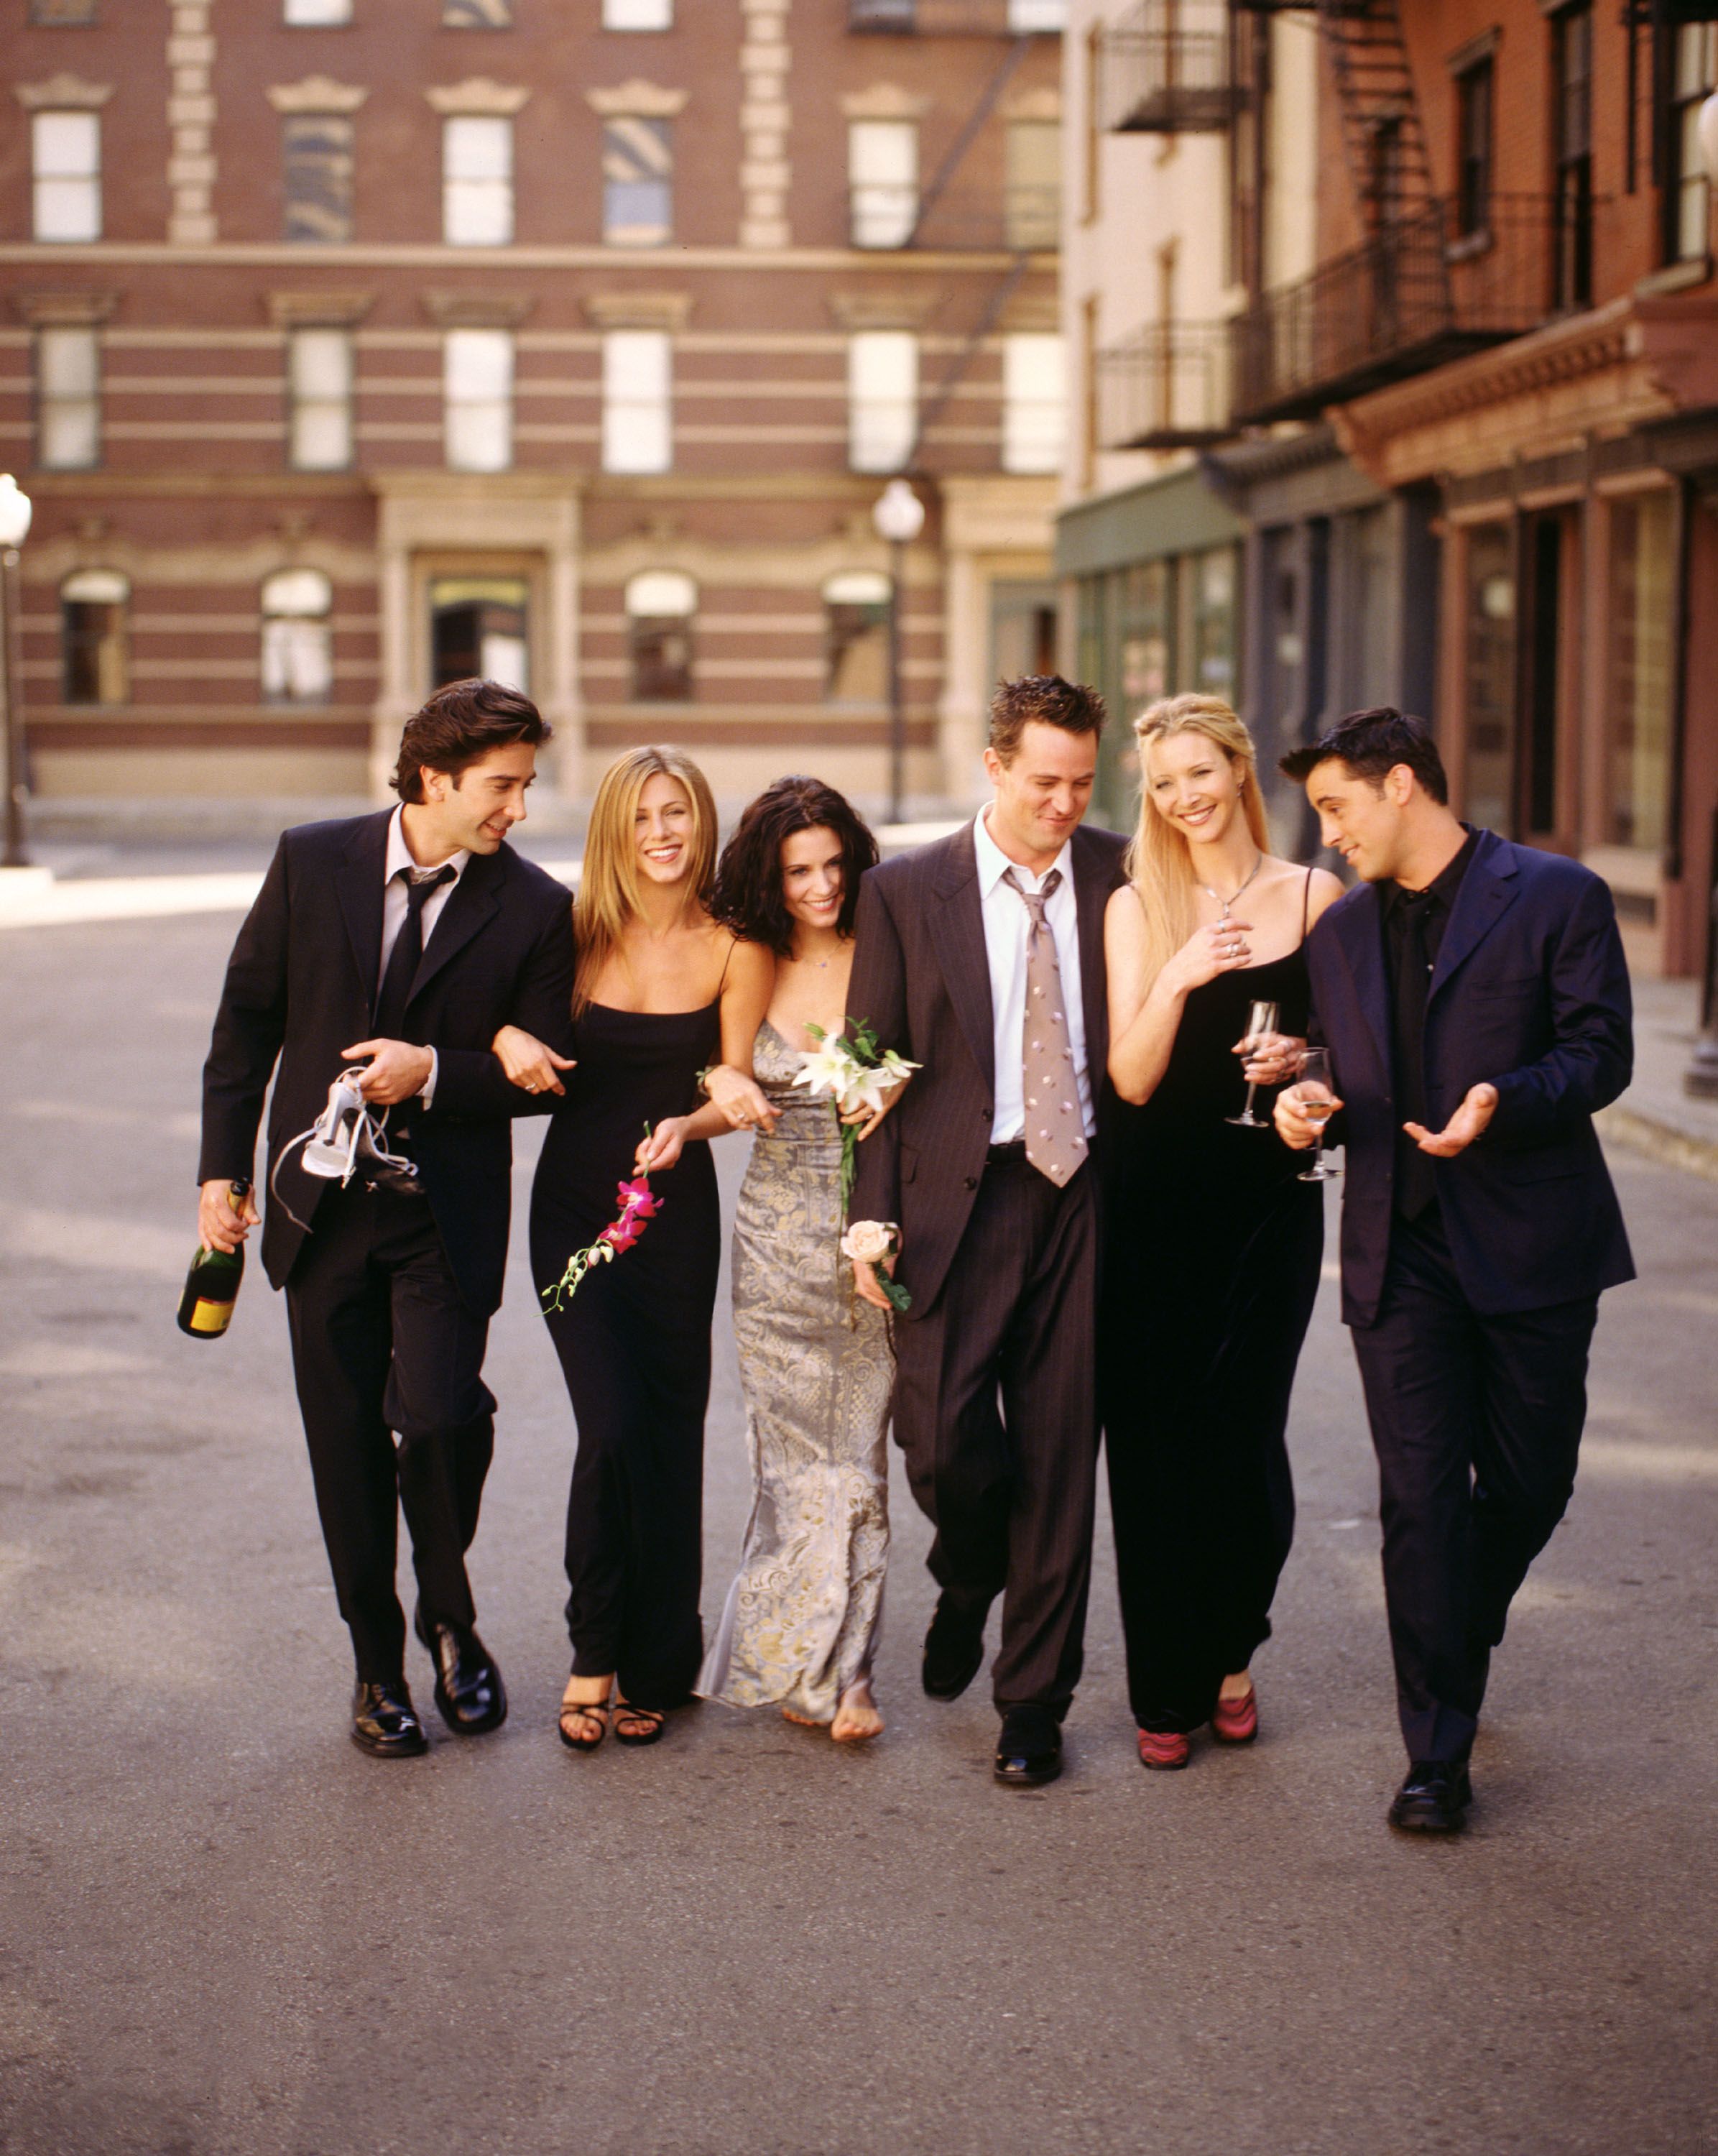 Cast members of NBC's comedy series "Friends" on March 07, 2001 | Photo: Getty Images